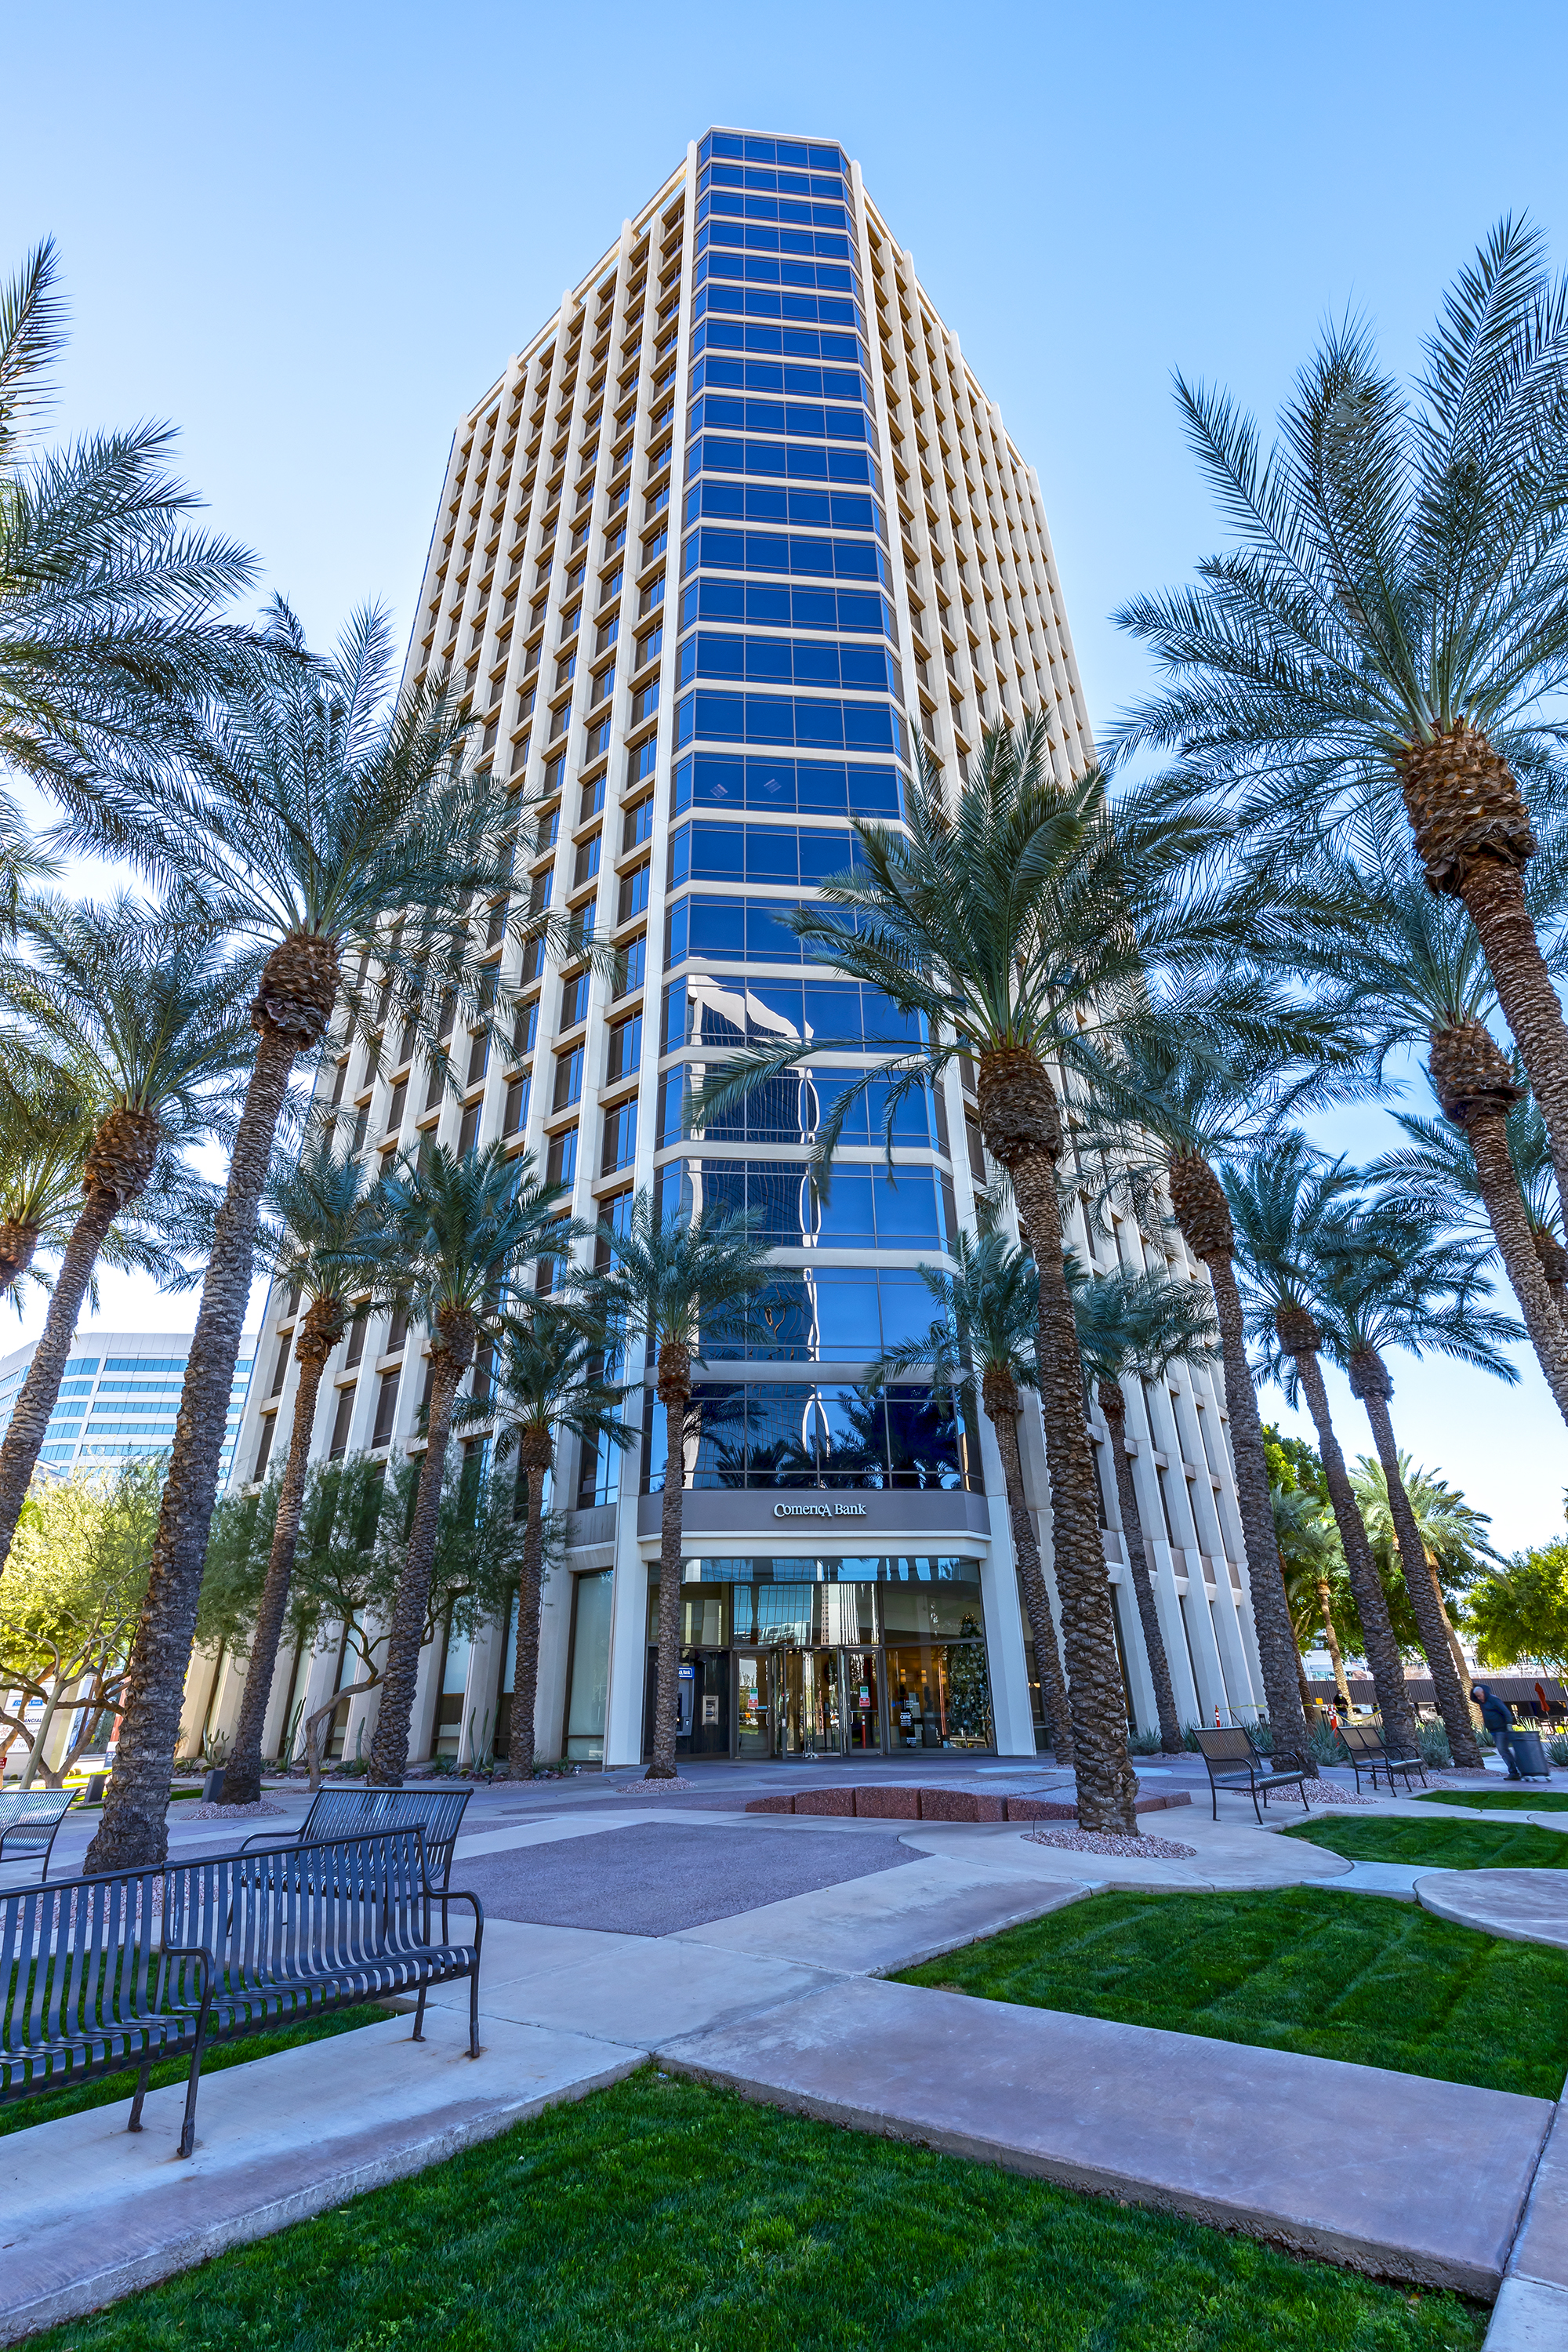 Younan Properties, a leading global real estate investment and management firm, has marked a significant milestone in its expansion strategy with the acquisition of 3200 Central, a Class A high-rise office building in the heart of downtown Phoenix.